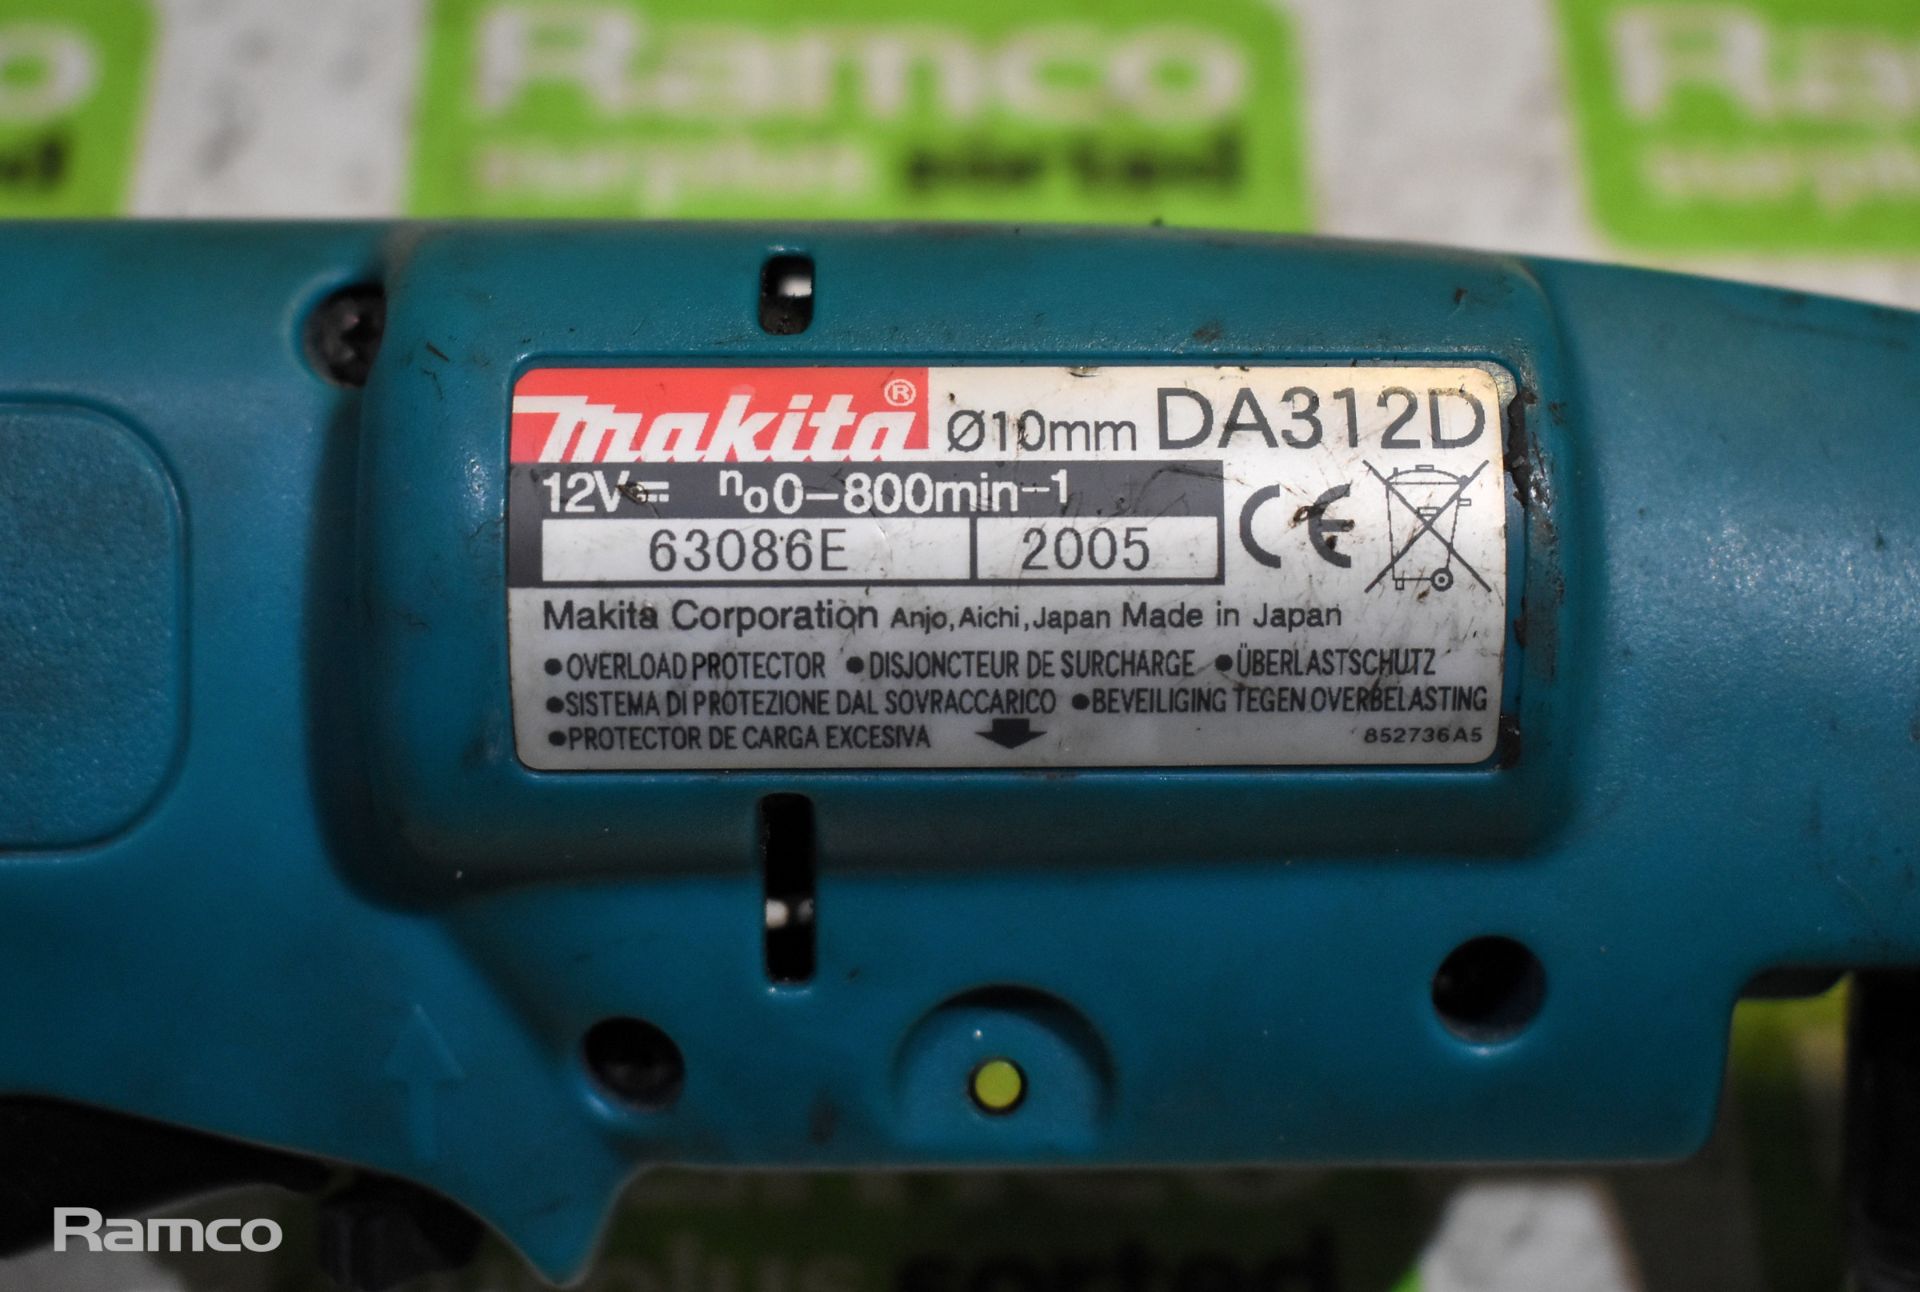 2x Makita DA312D cordless angle drill with charger, battery and case - Image 8 of 9